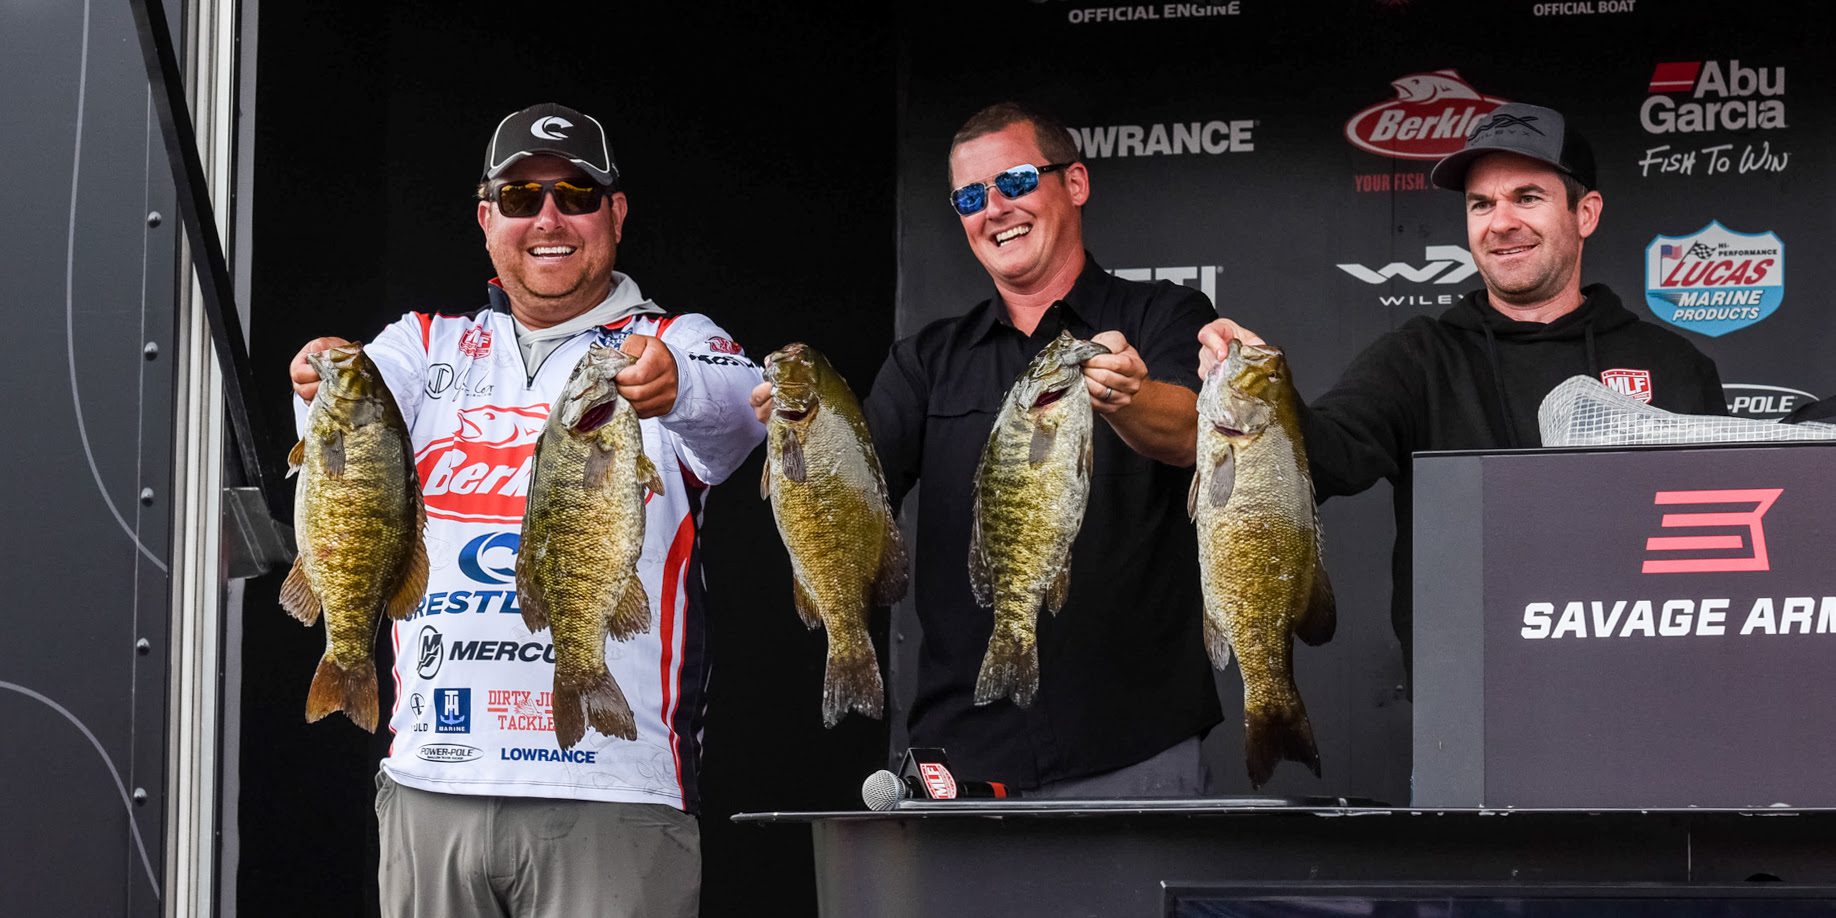 John Cox Leads Day 1 of Tackle Warehouse Pro Circuit Savage Arms Stop 6 on  St. Lawrence River Presented by Abu Garcia